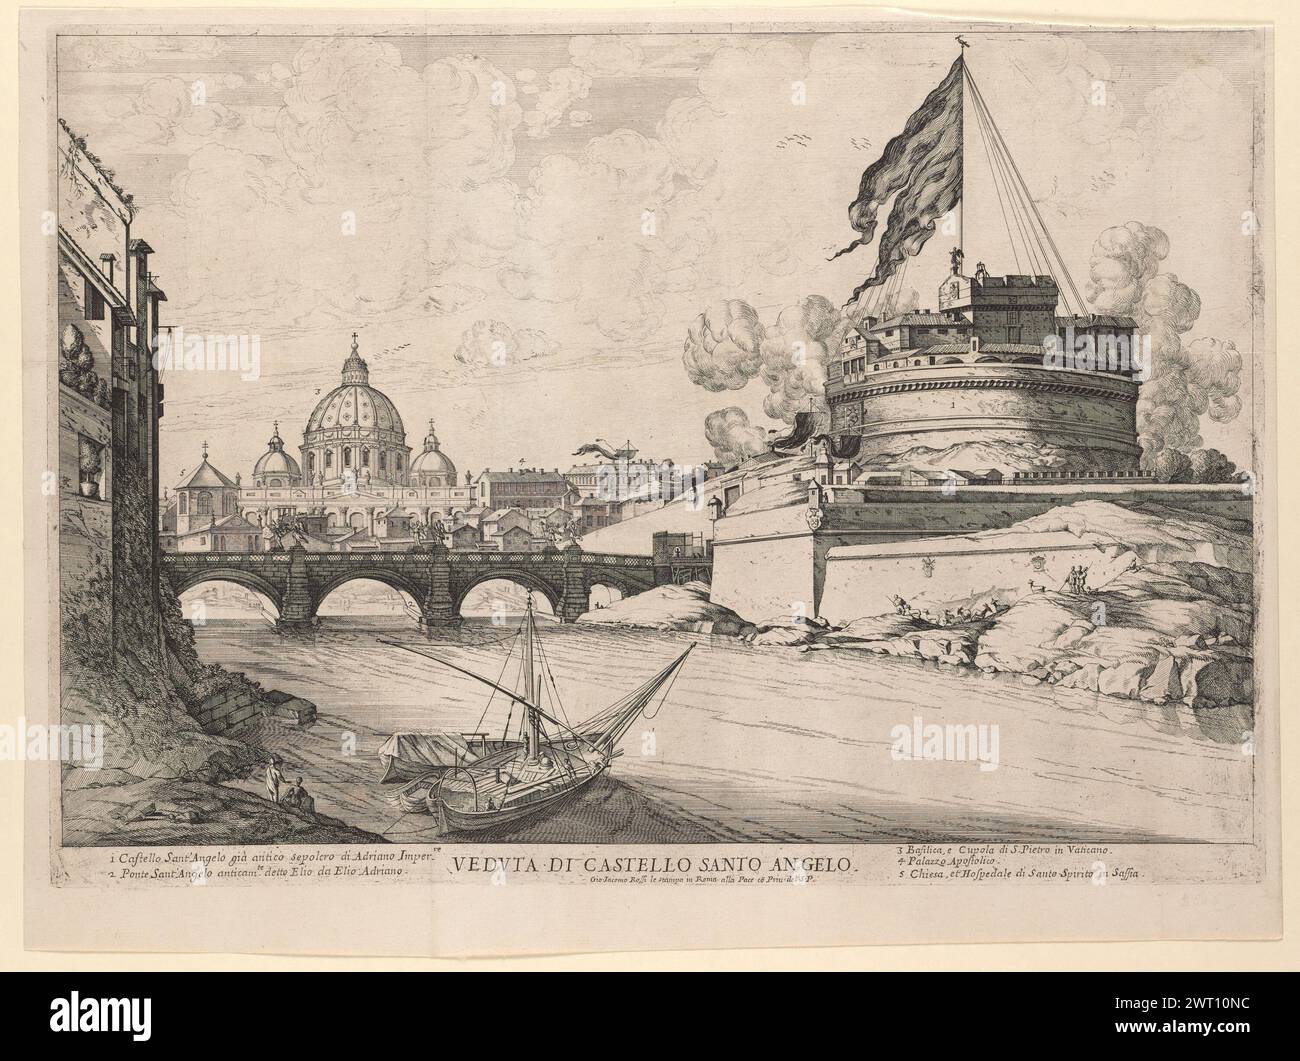 Veduta di Castello Santo Angelo, undated. undated Castel Sant'Angelo The print depicts the Castel Sant'Angelo, flying a large flag and surrounded by artillery smoke with the Basilica di San Pietro in Vaticano in the background, the bridge, and a sailing vessel in the foreground. With a legend of 5 sites including Castel Sant'Angelo, Saint Peter's, and the church and hospital of Santo Spirito in Sassia. Imprint: Rome, Giovanni Jacomo Rossi la Stampa in Roma alla Pace. Ref.: The Illustrated Bartsch. Vol. 47, pt. 2. Commentary. Italian Masters of the Seventeenth Century: Giovanni Battista Falda, Stock Photo